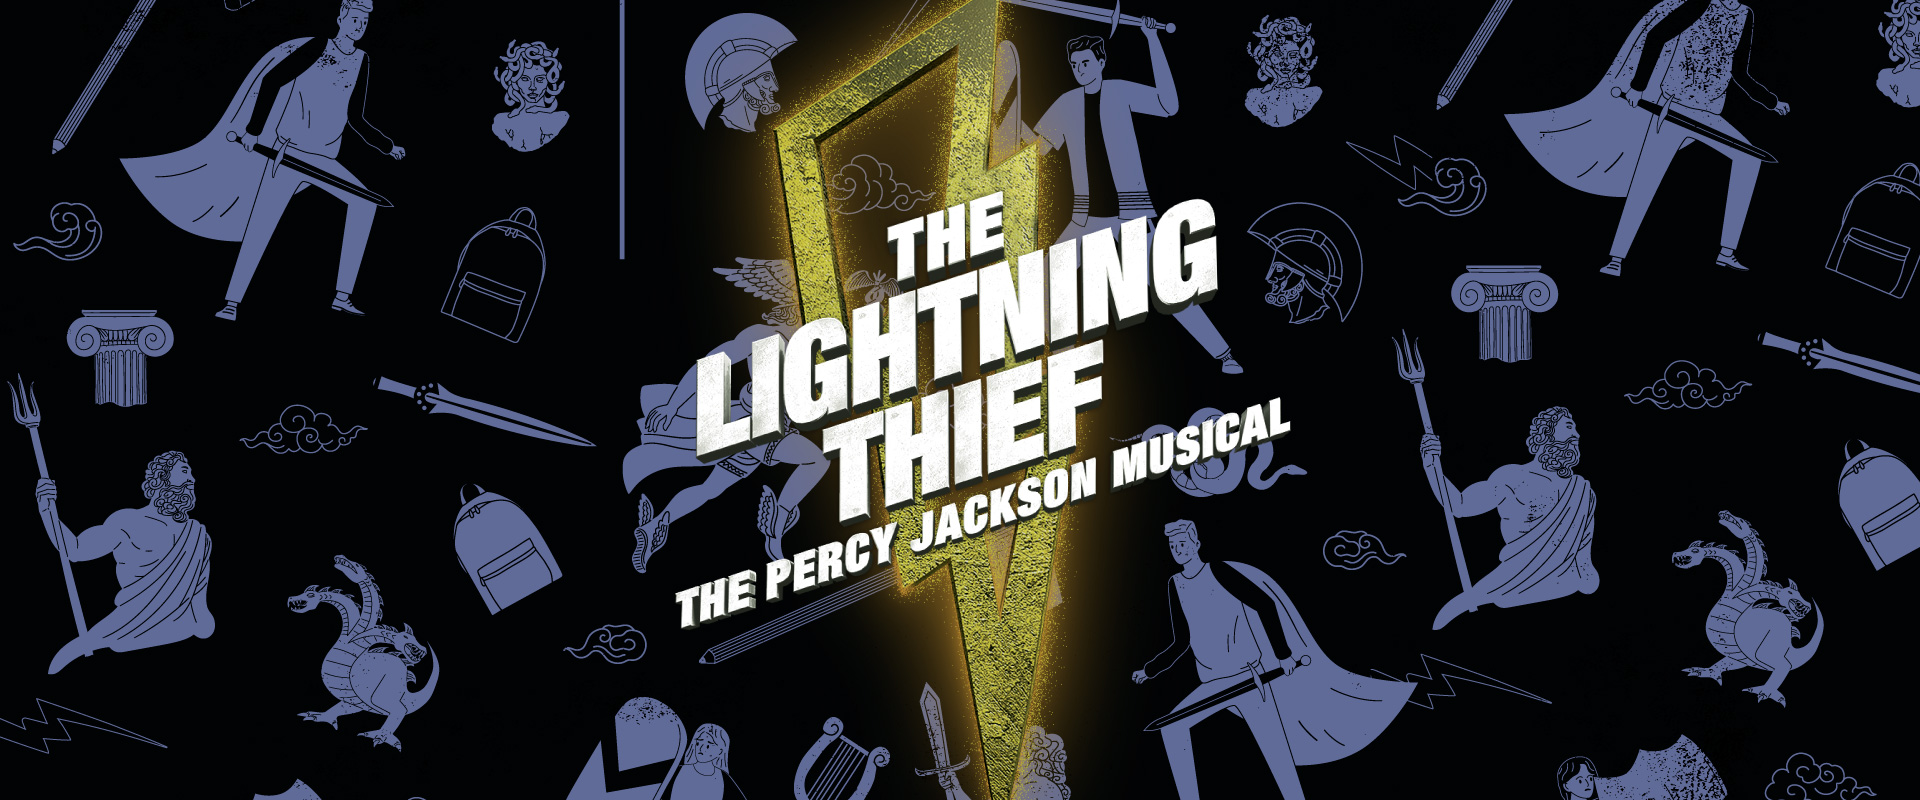 The Lightning Thief The Percy Jackson Musical